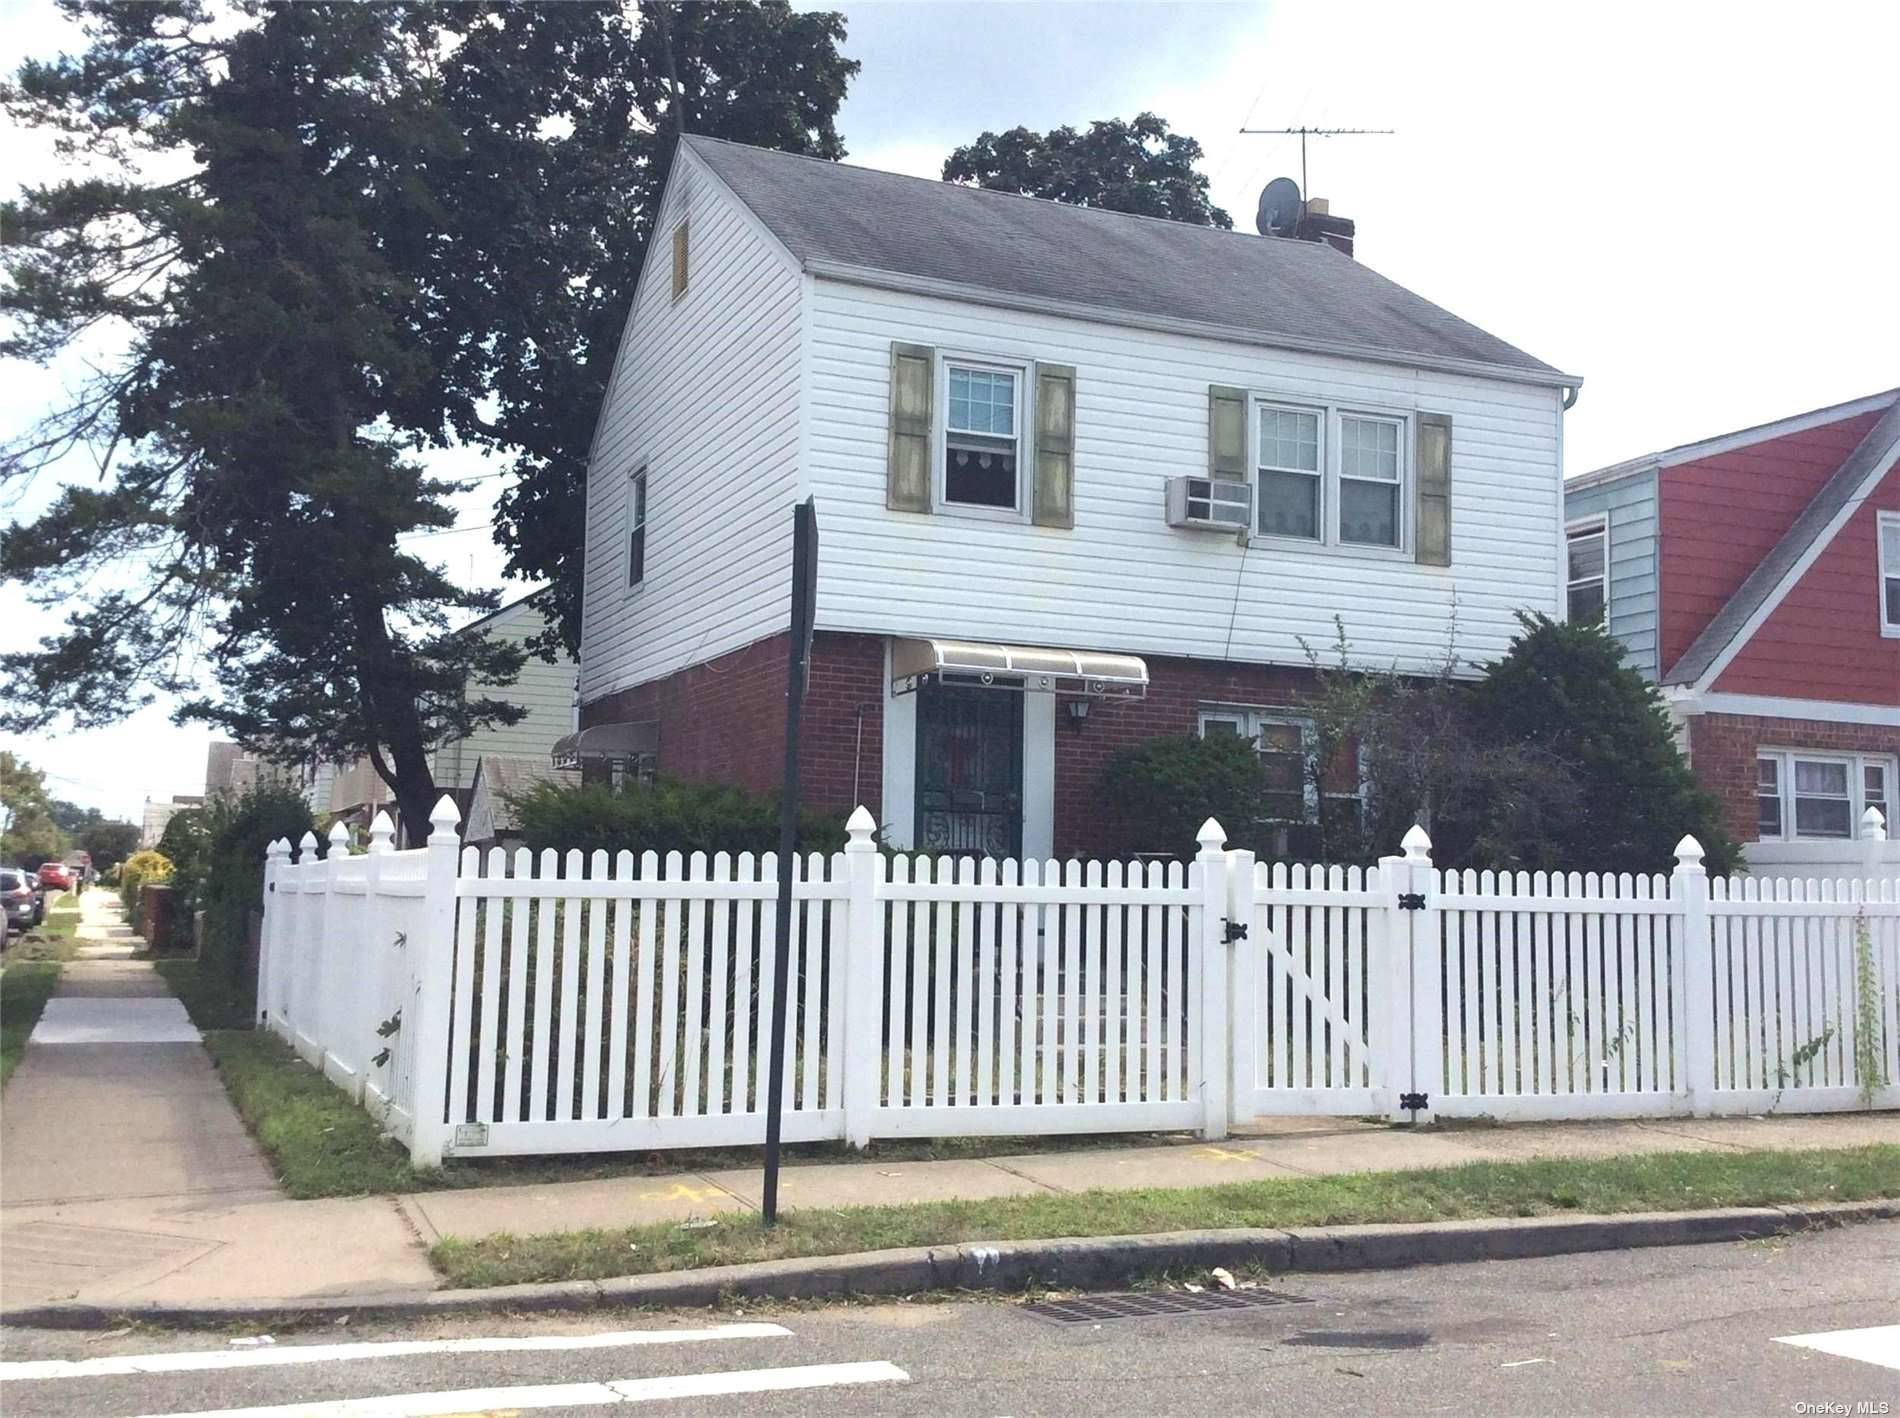 Located A Block From Busy Linden Blvd, This Detached Colonial Sits At A Corner And Features Very Large Rooms.